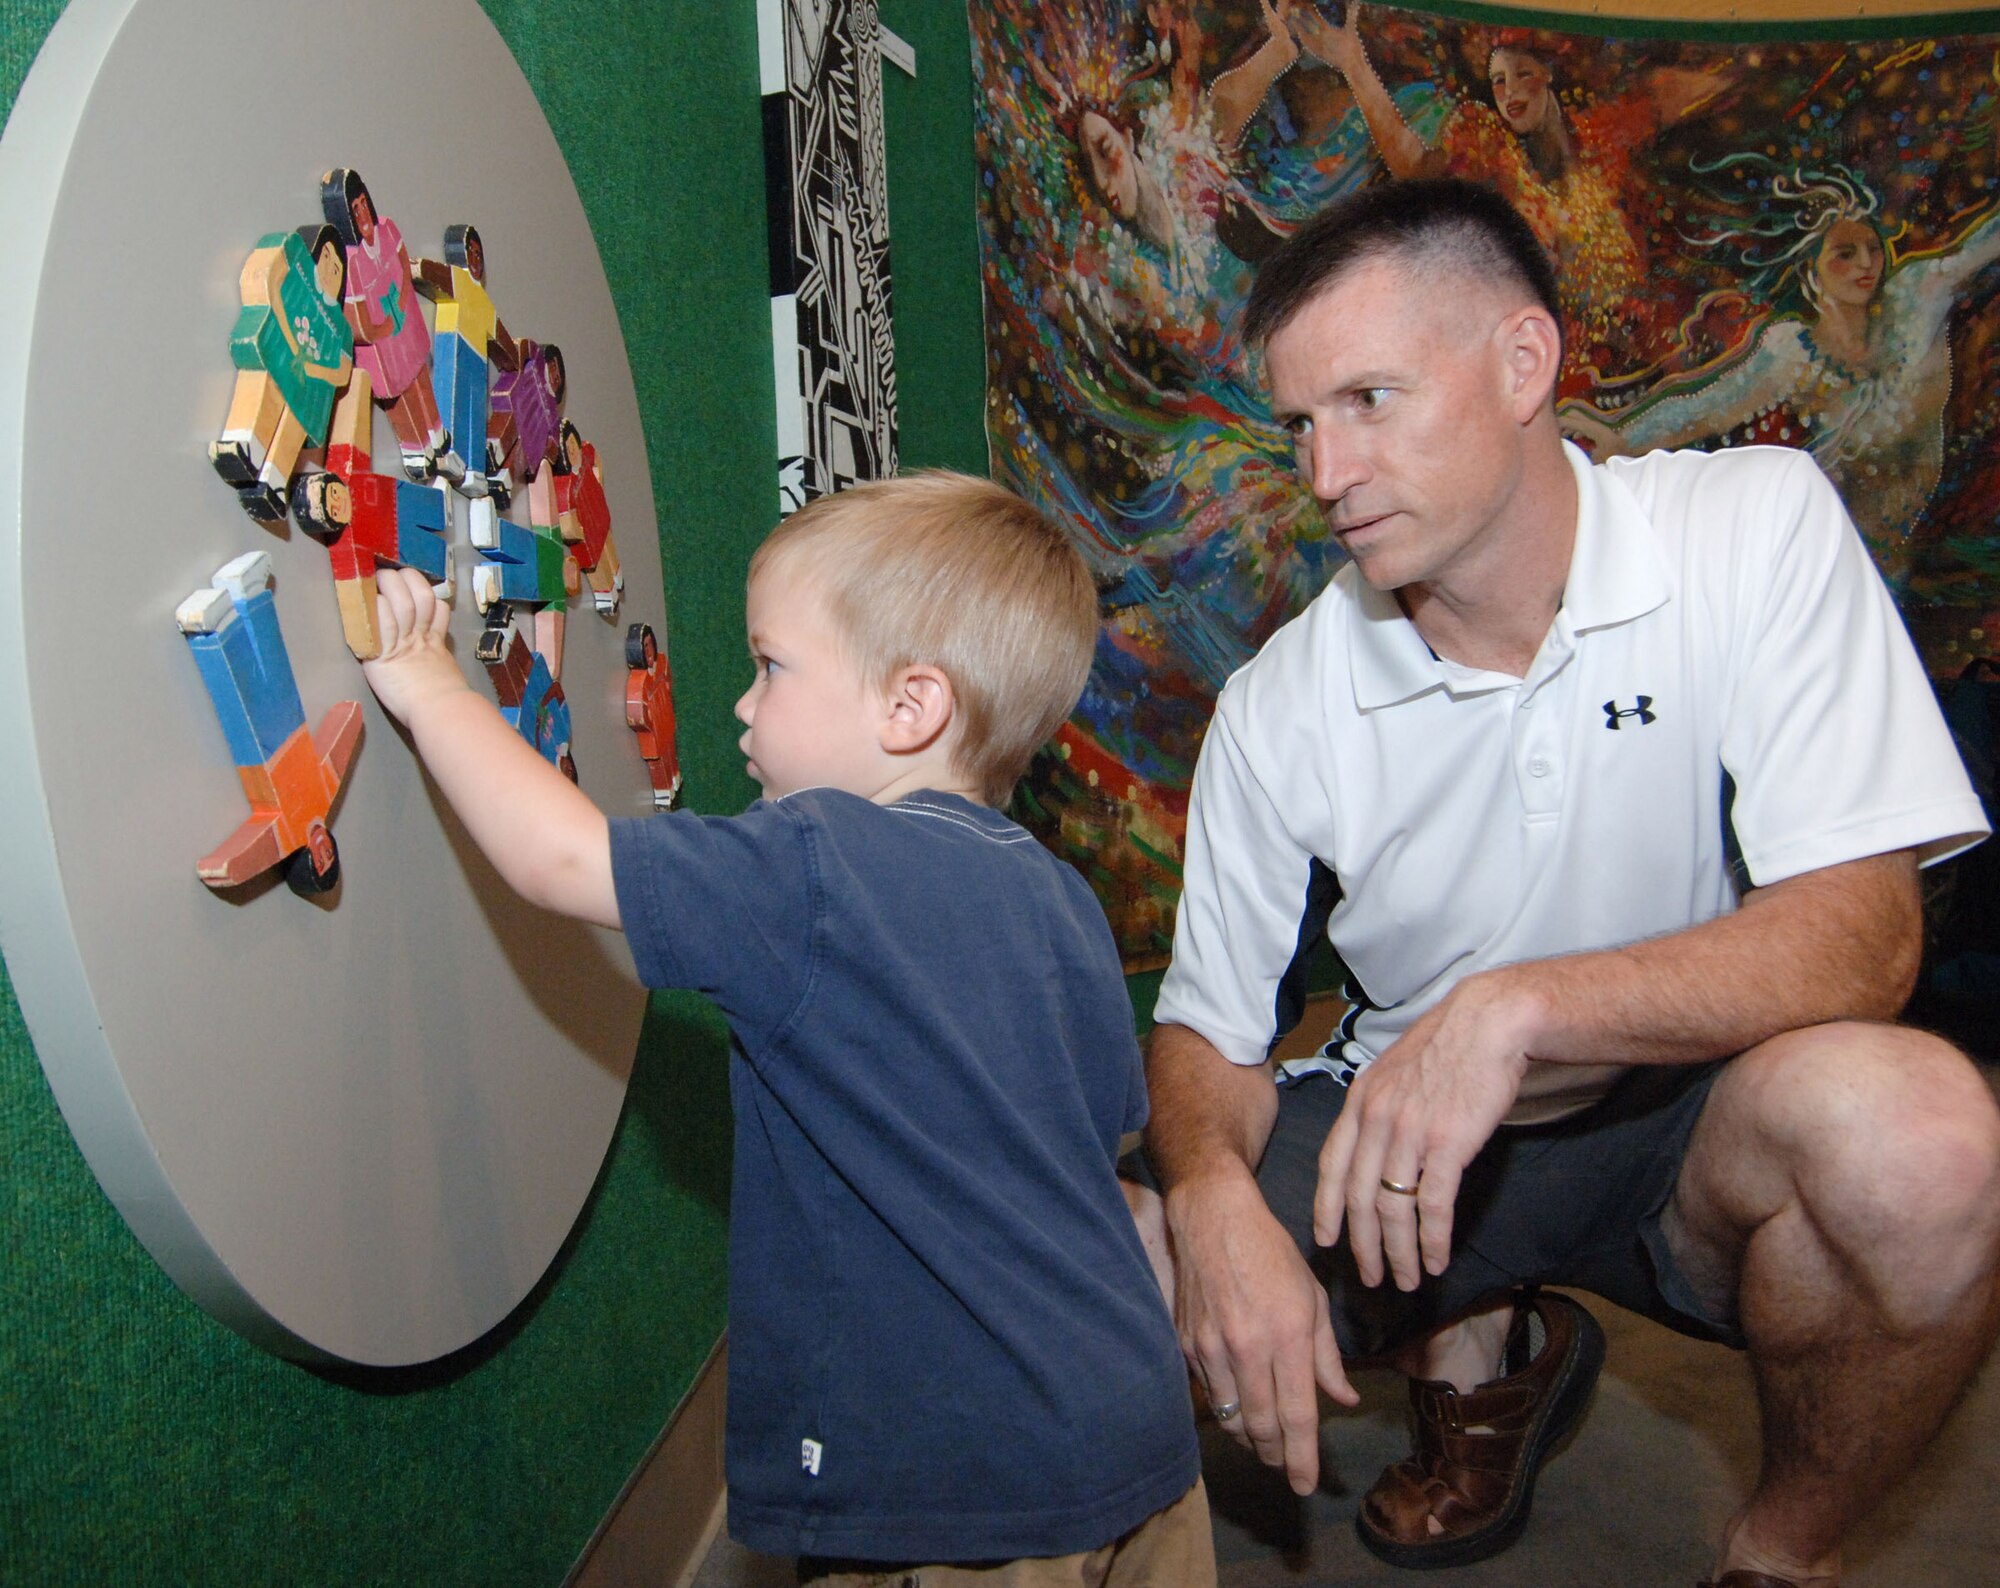 Maj. Jim Beaty, Air Command and Staff College student, and his son Emmett try out one of the interactive exhibits at the Military Appreciation Night Aug. 20 at the Montgomery Museum of Fine Arts. (U.S. Air Force photo/Melanie Rodgers Cox)